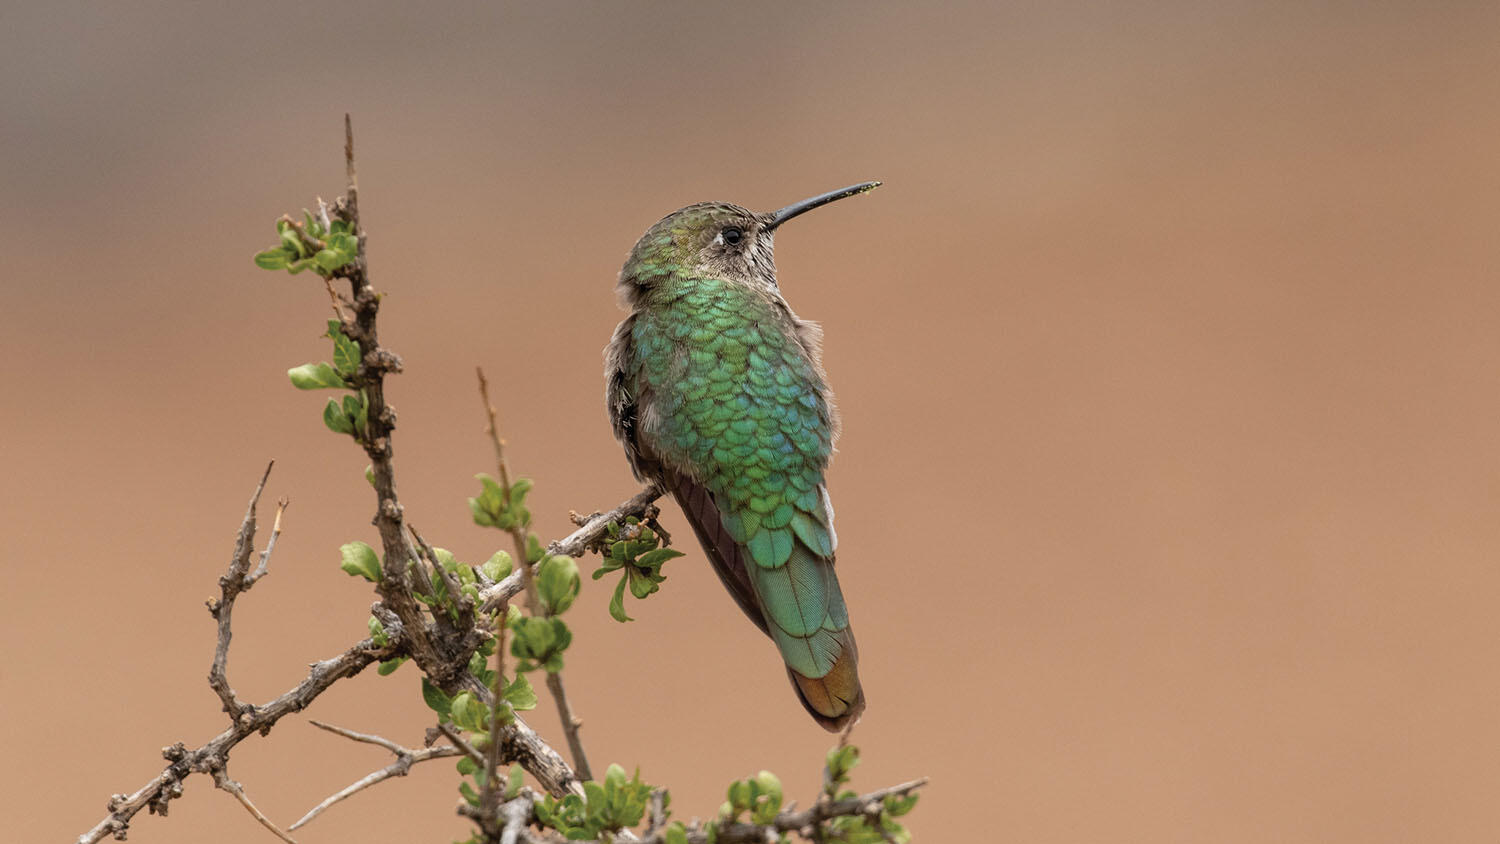 The bronze-tailed comet (Polyonymus caroli), a hummingbird native to the Andes. (Photo by thibaudaronson.)